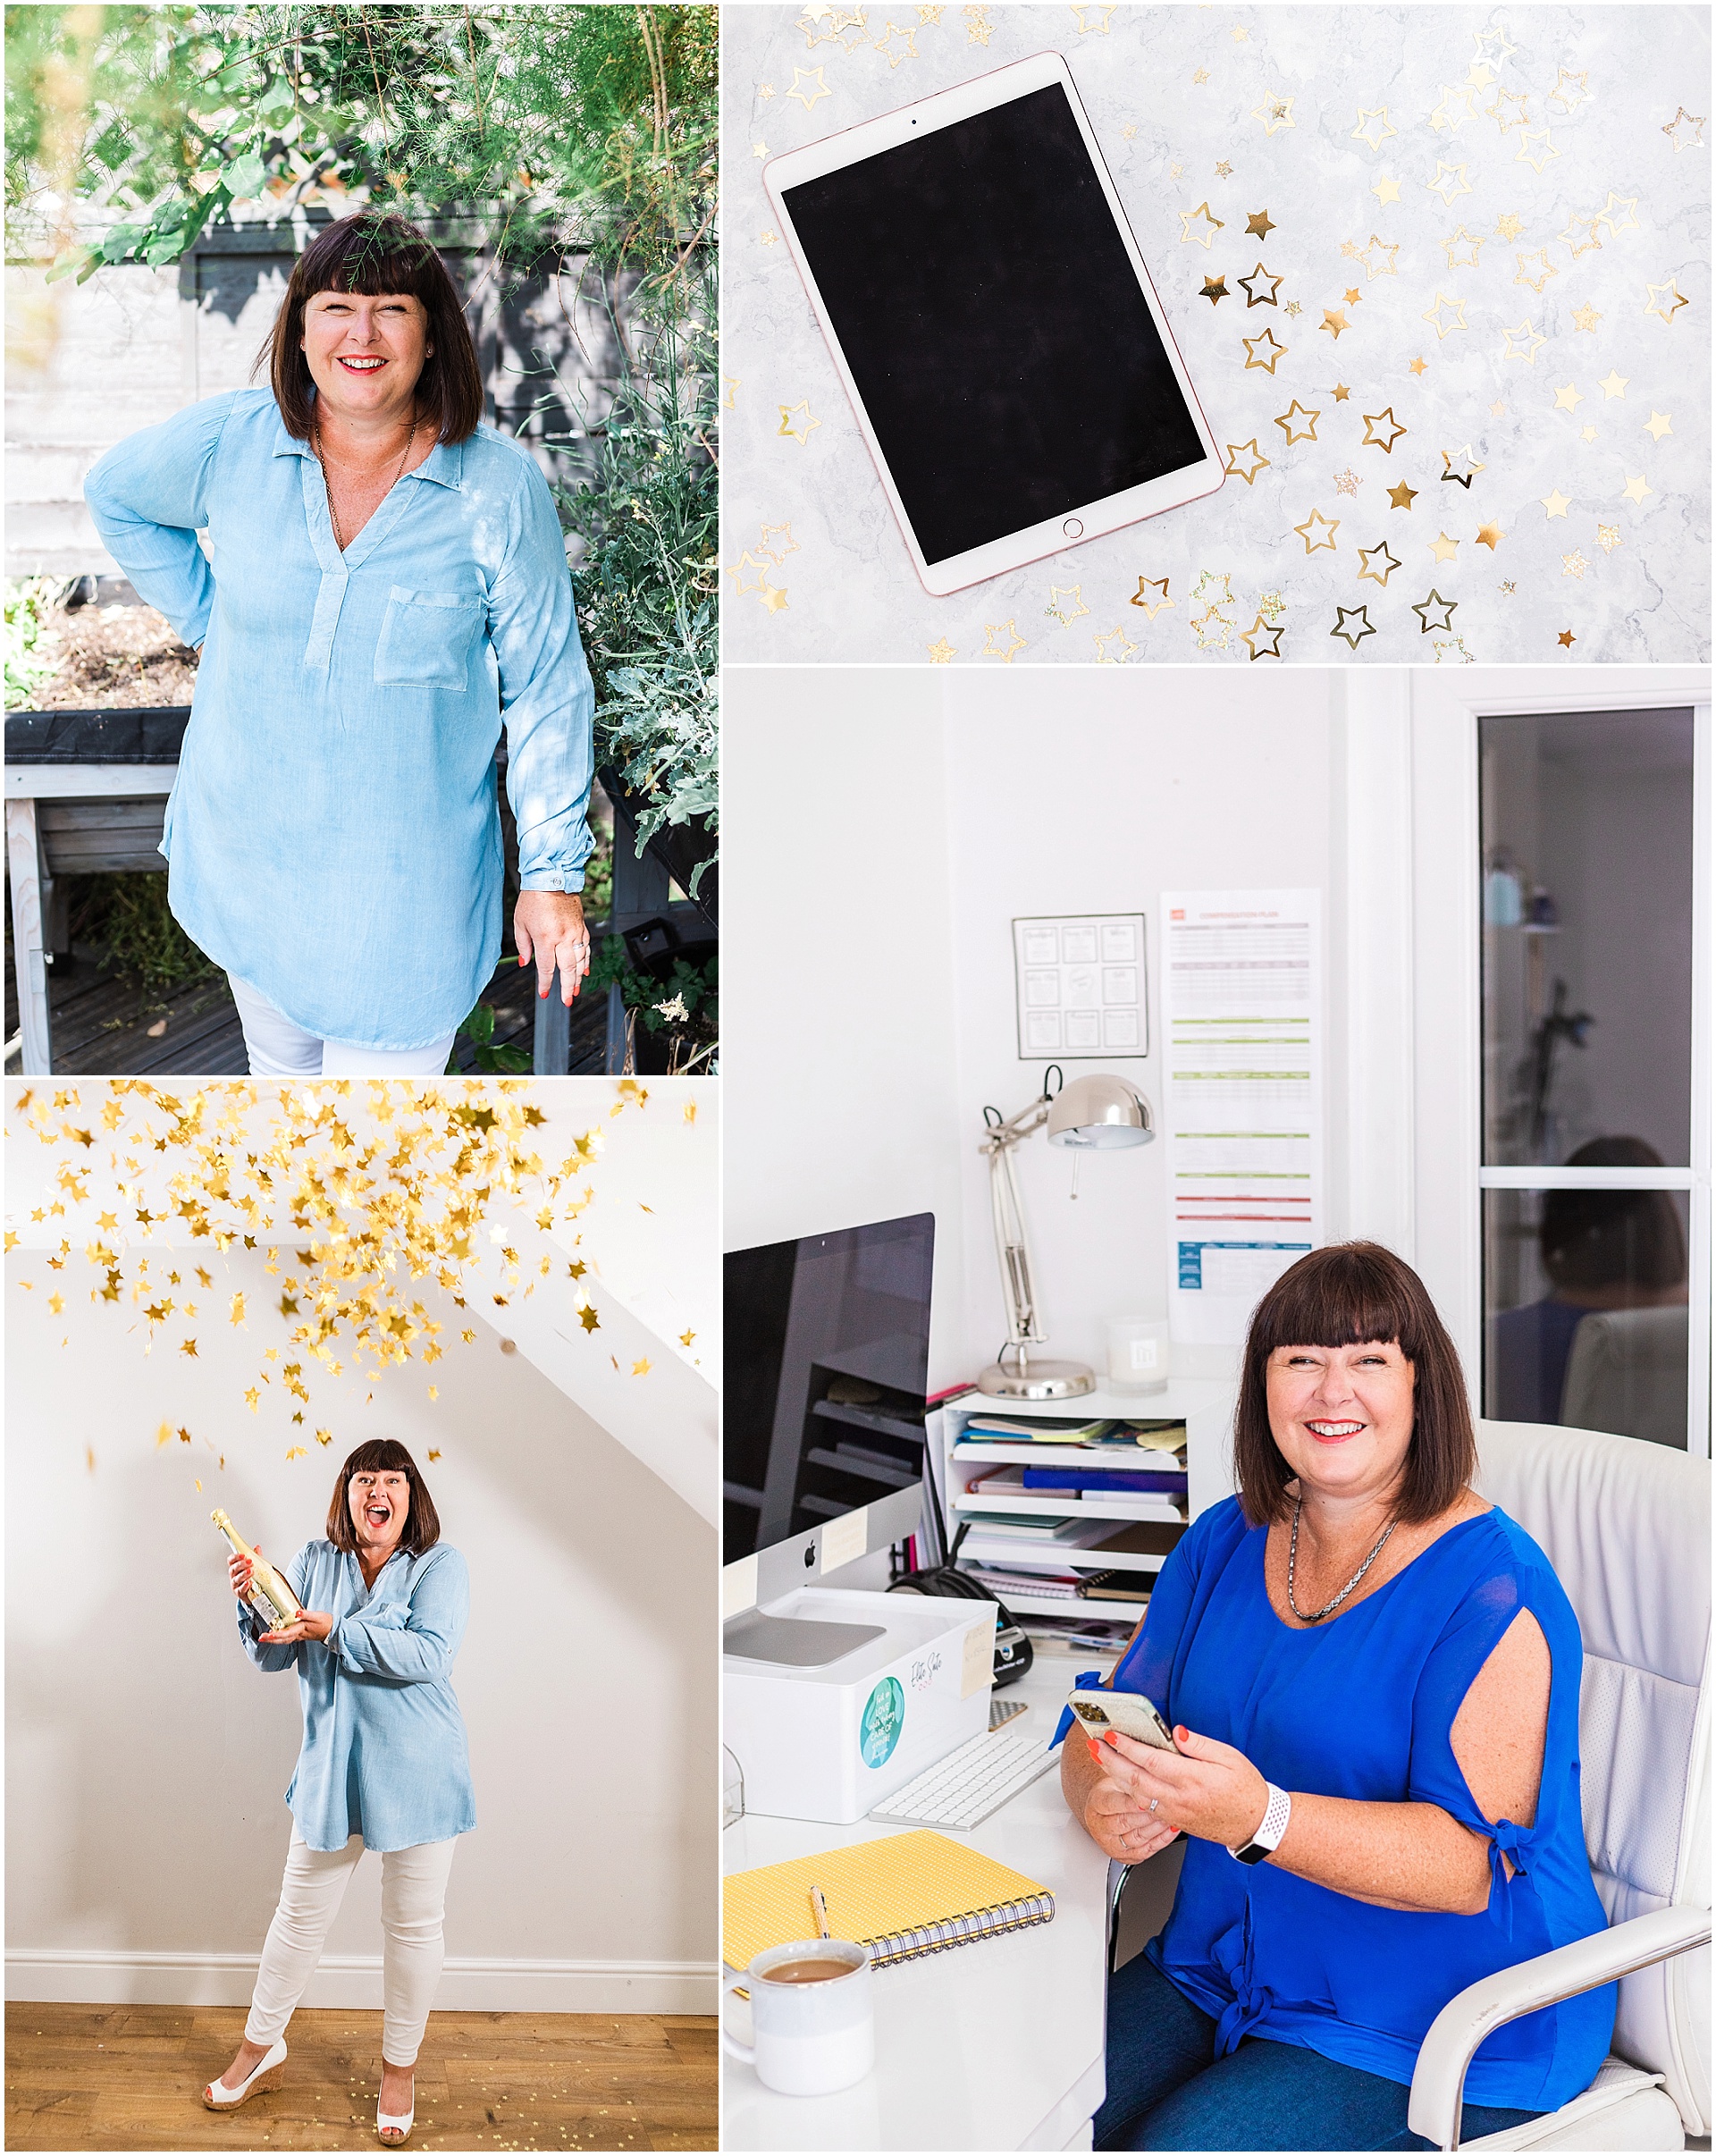 Natalie OShea working and celebrating at home for her new business. Images by London brand photographer AKP Branding Stories